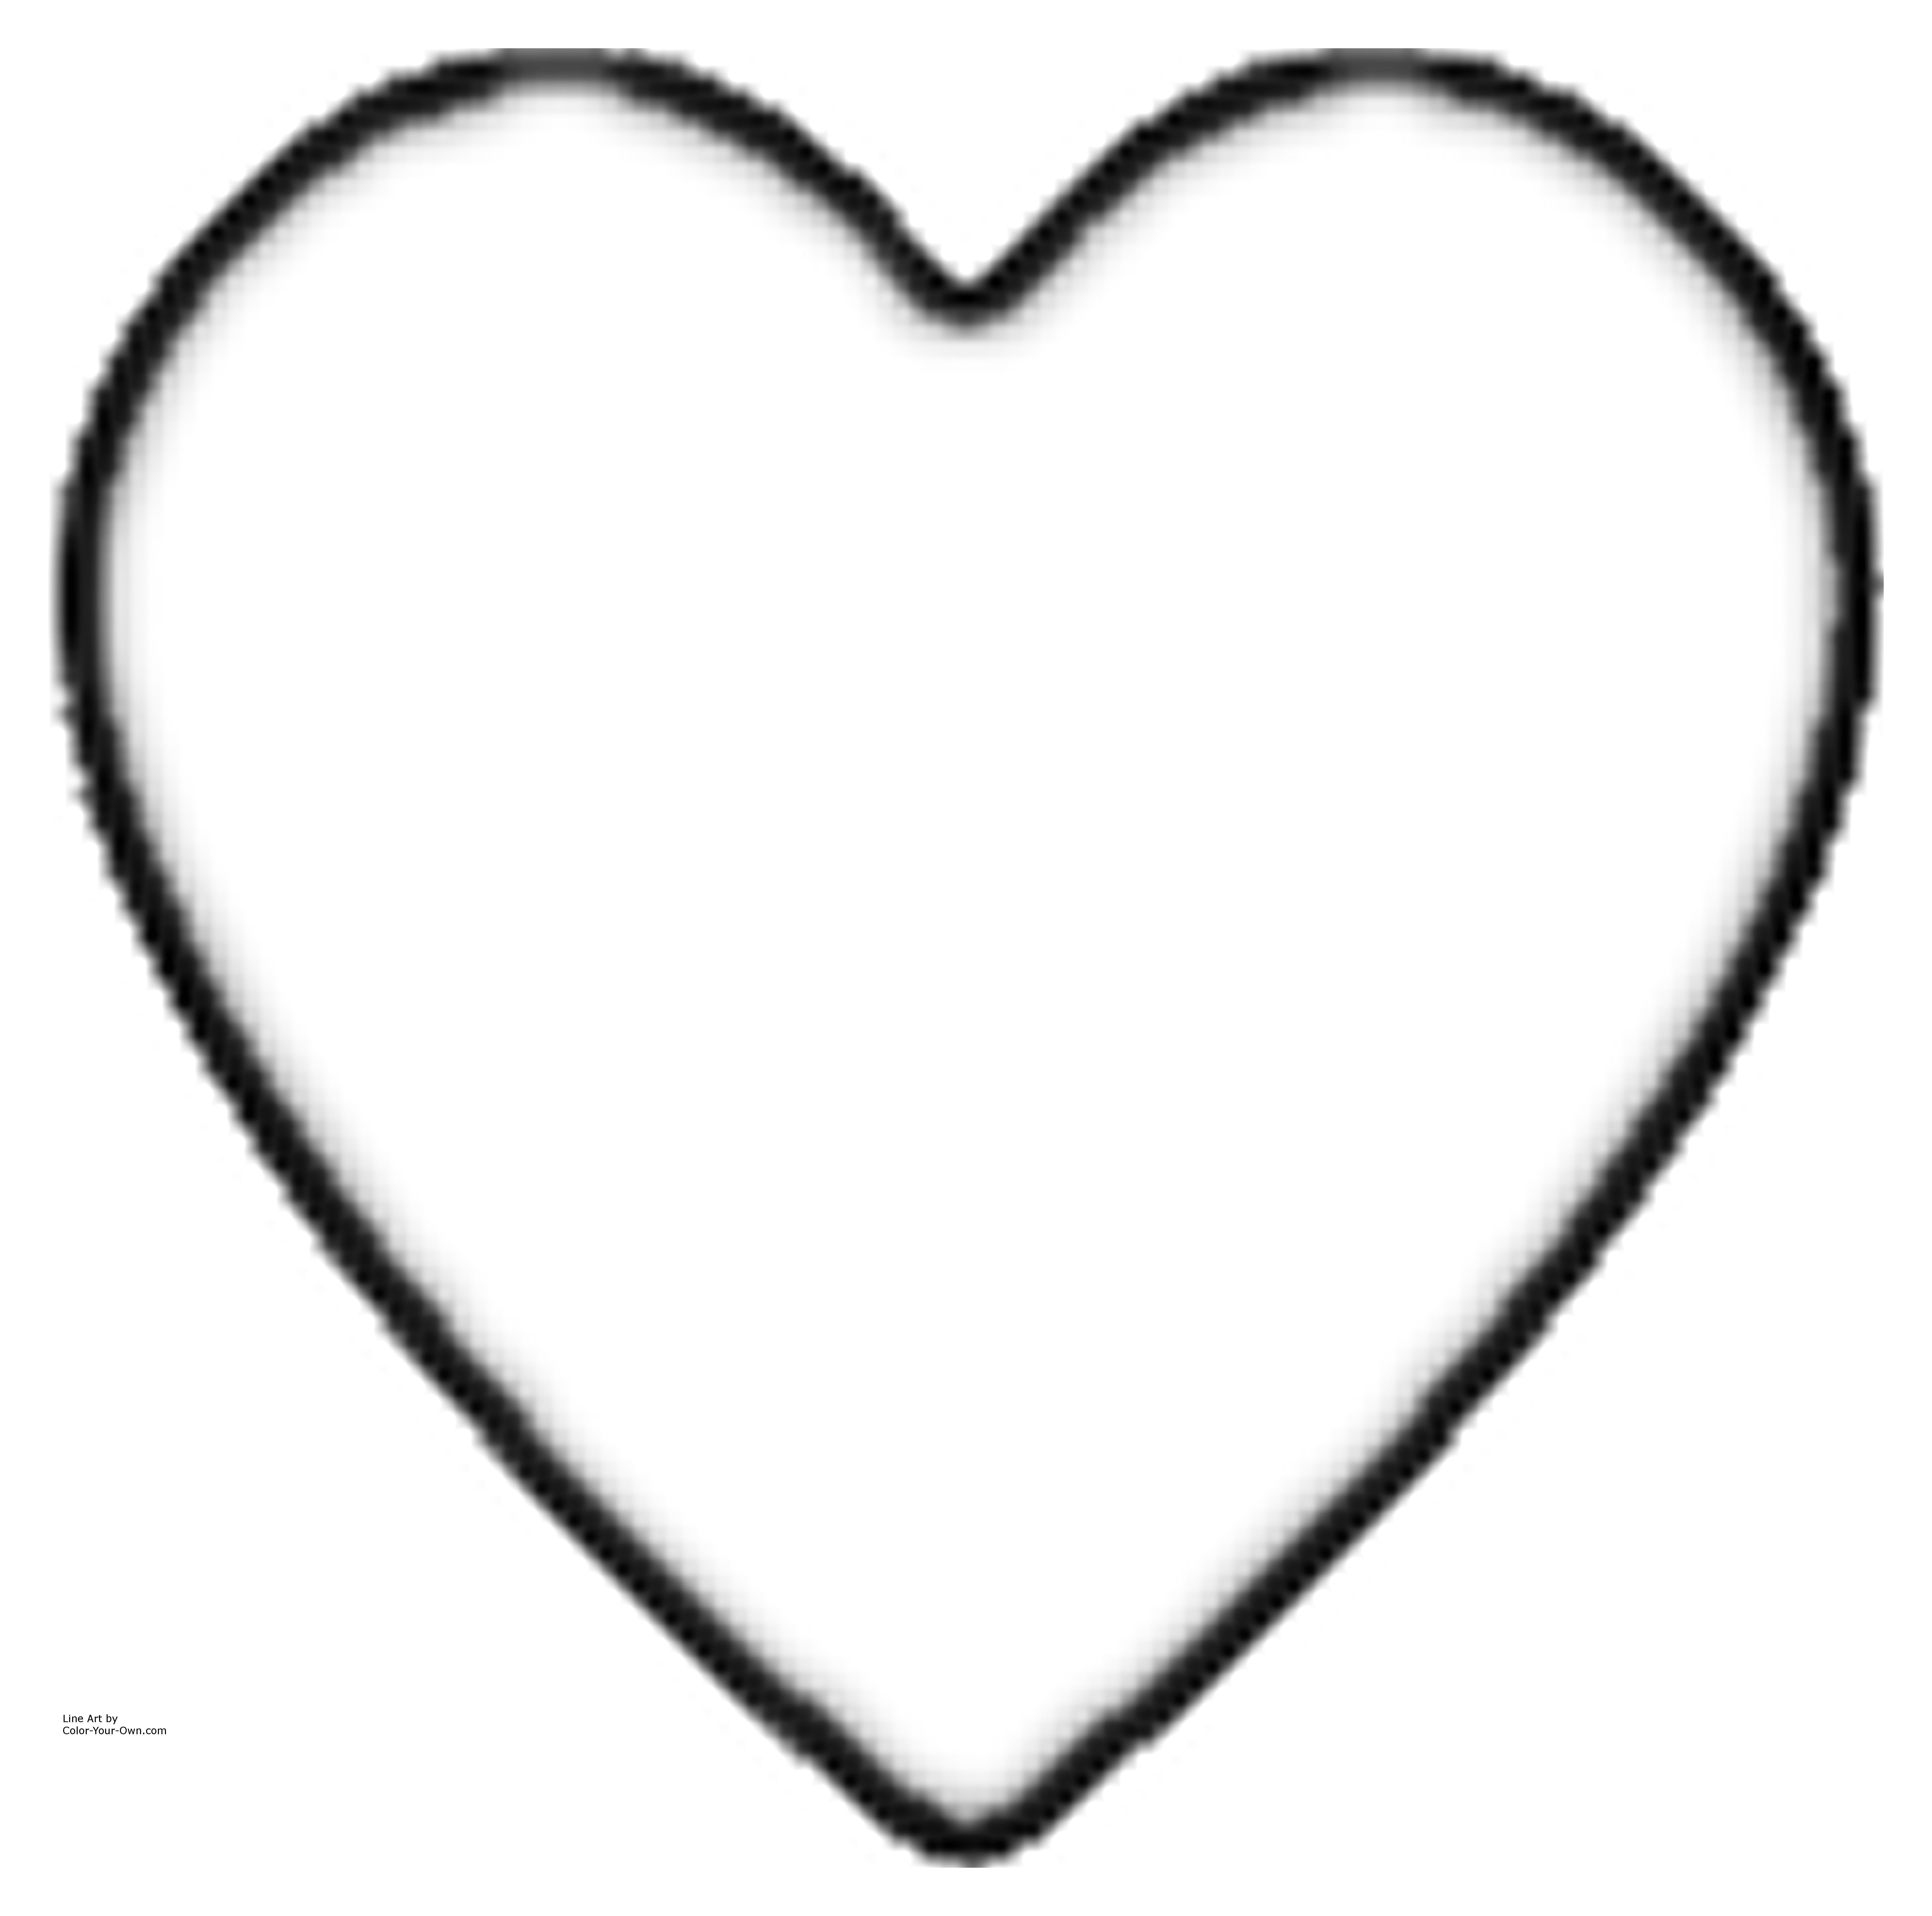 Free Heart Coloring Pages Printable Download Free Heart Coloring Pages